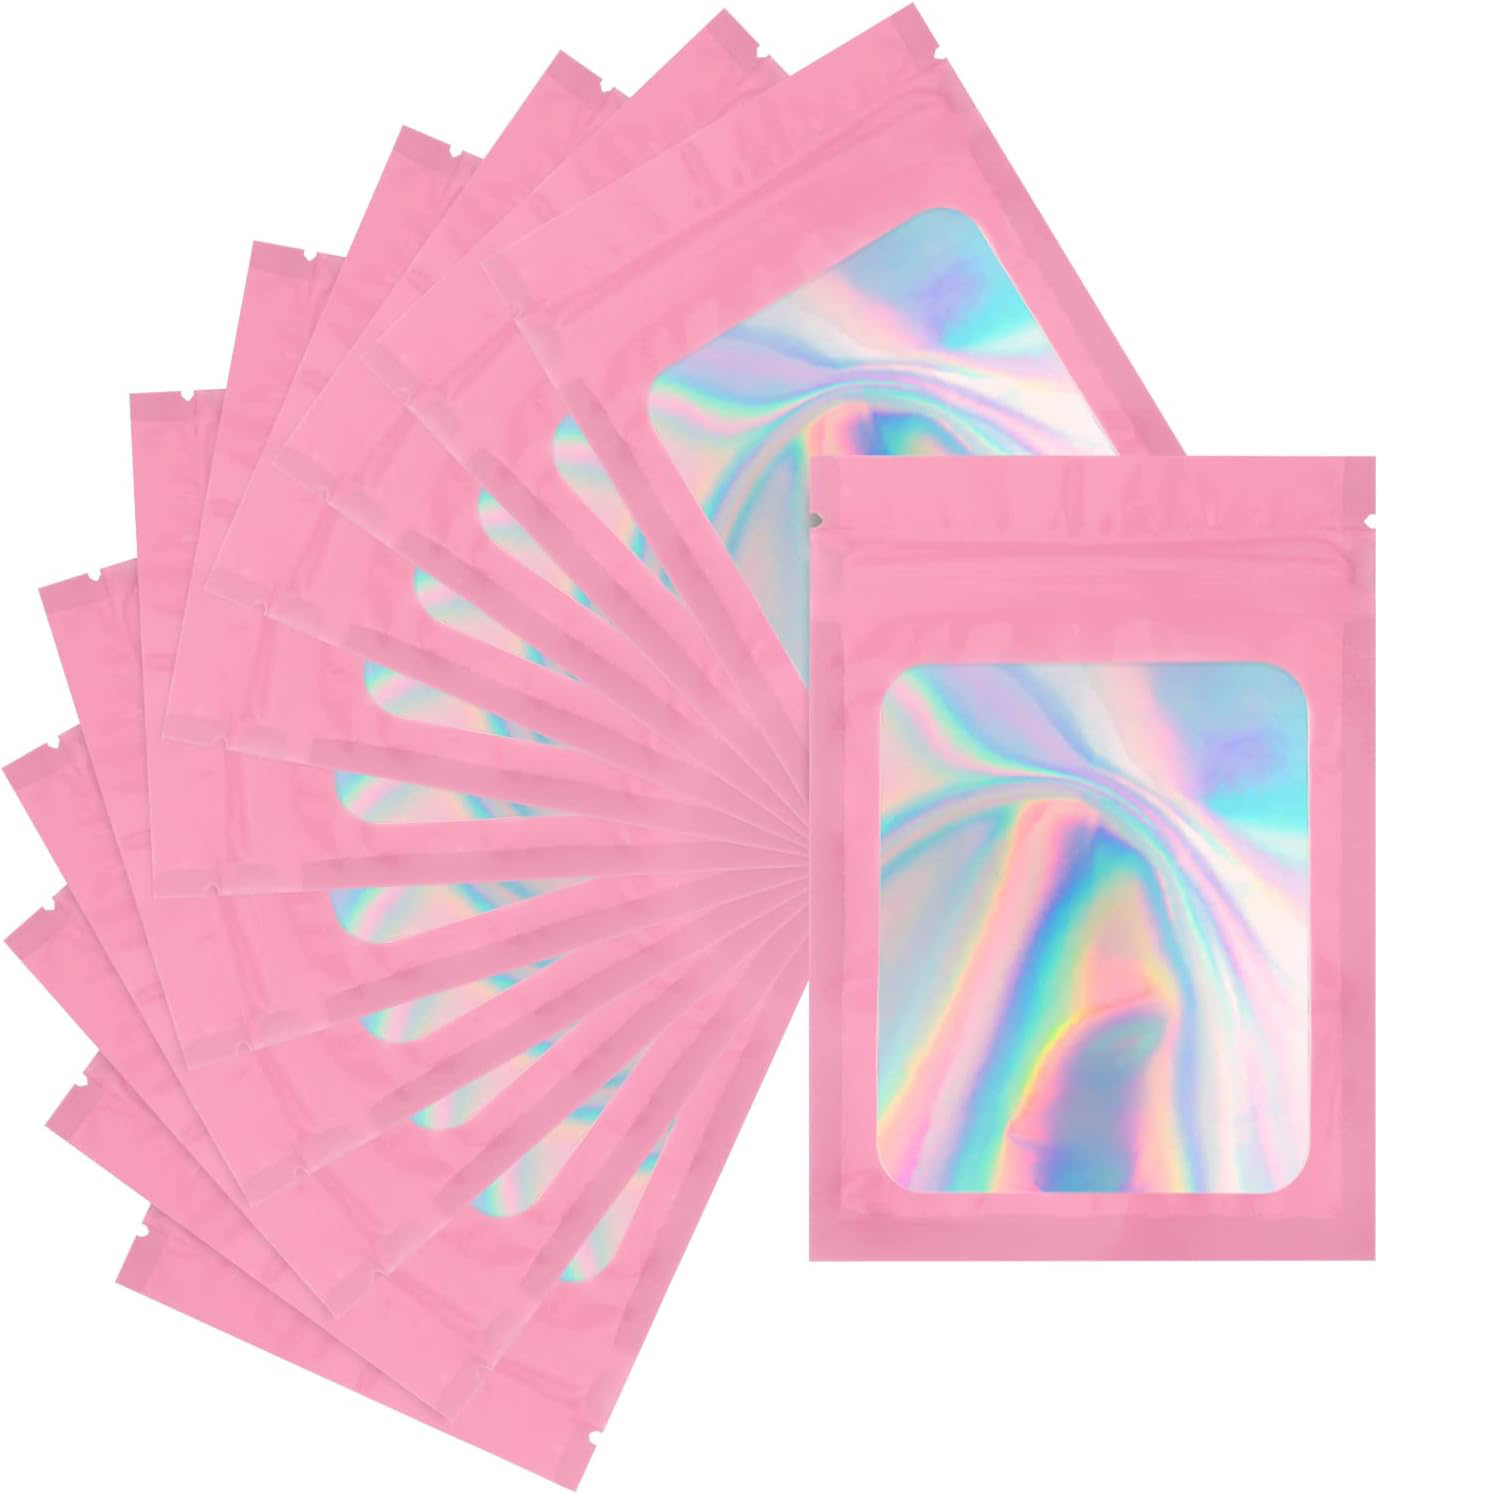 

100pcs Jewelry Packaging Holographic Ziplock Bags Small Business Practical Convenient Supplies Sealable Resealable Sample Bag For Food Candy, Crafts, Jewelry Package Storage